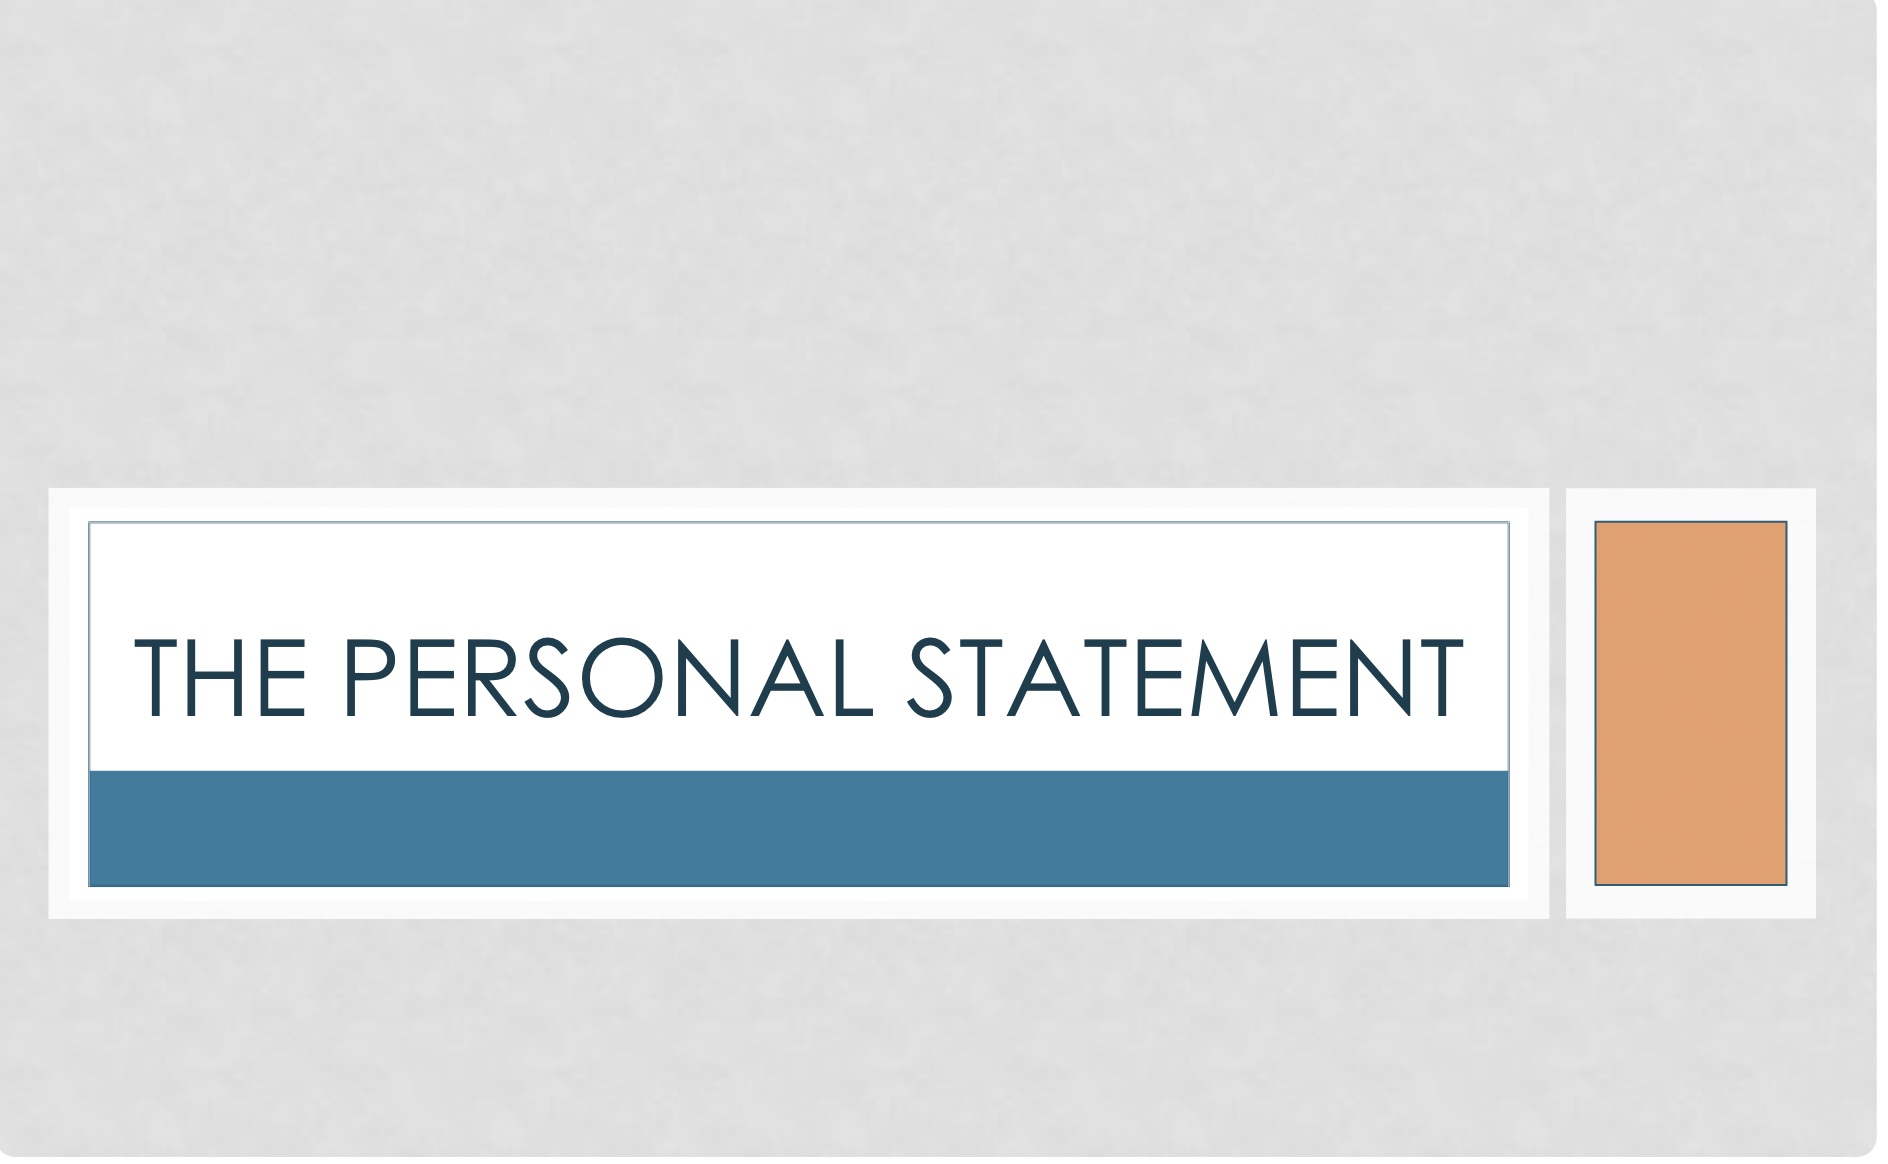 Click for powerpoint on how to write personal statements for REUs